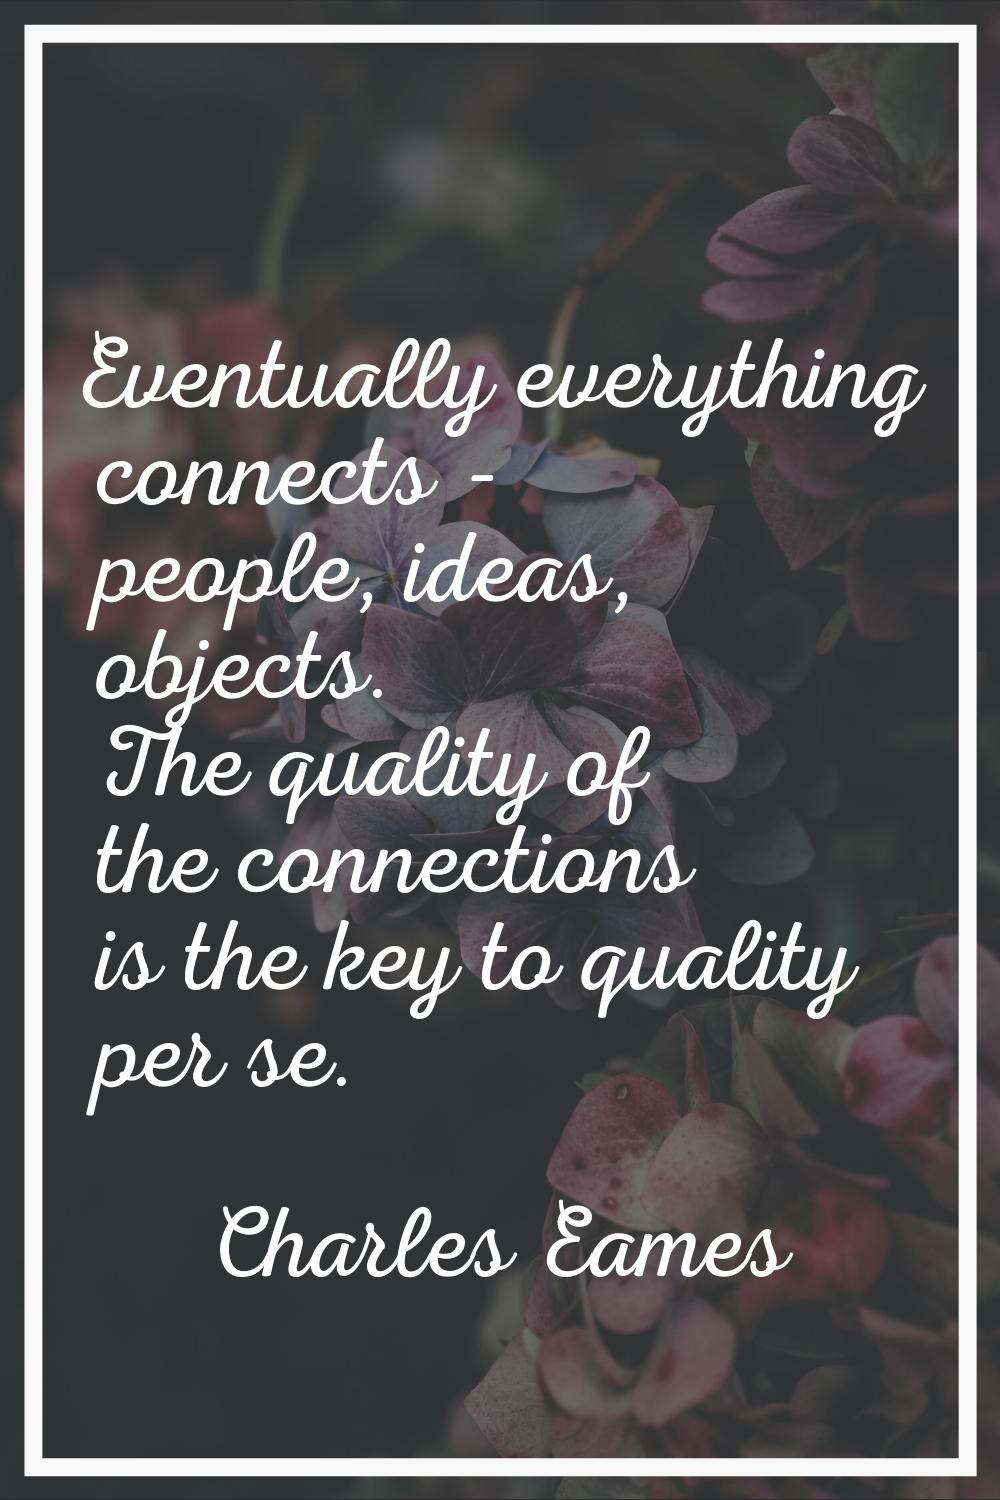 Eventually everything connects - people, ideas, objects. The quality of the connections is the key 